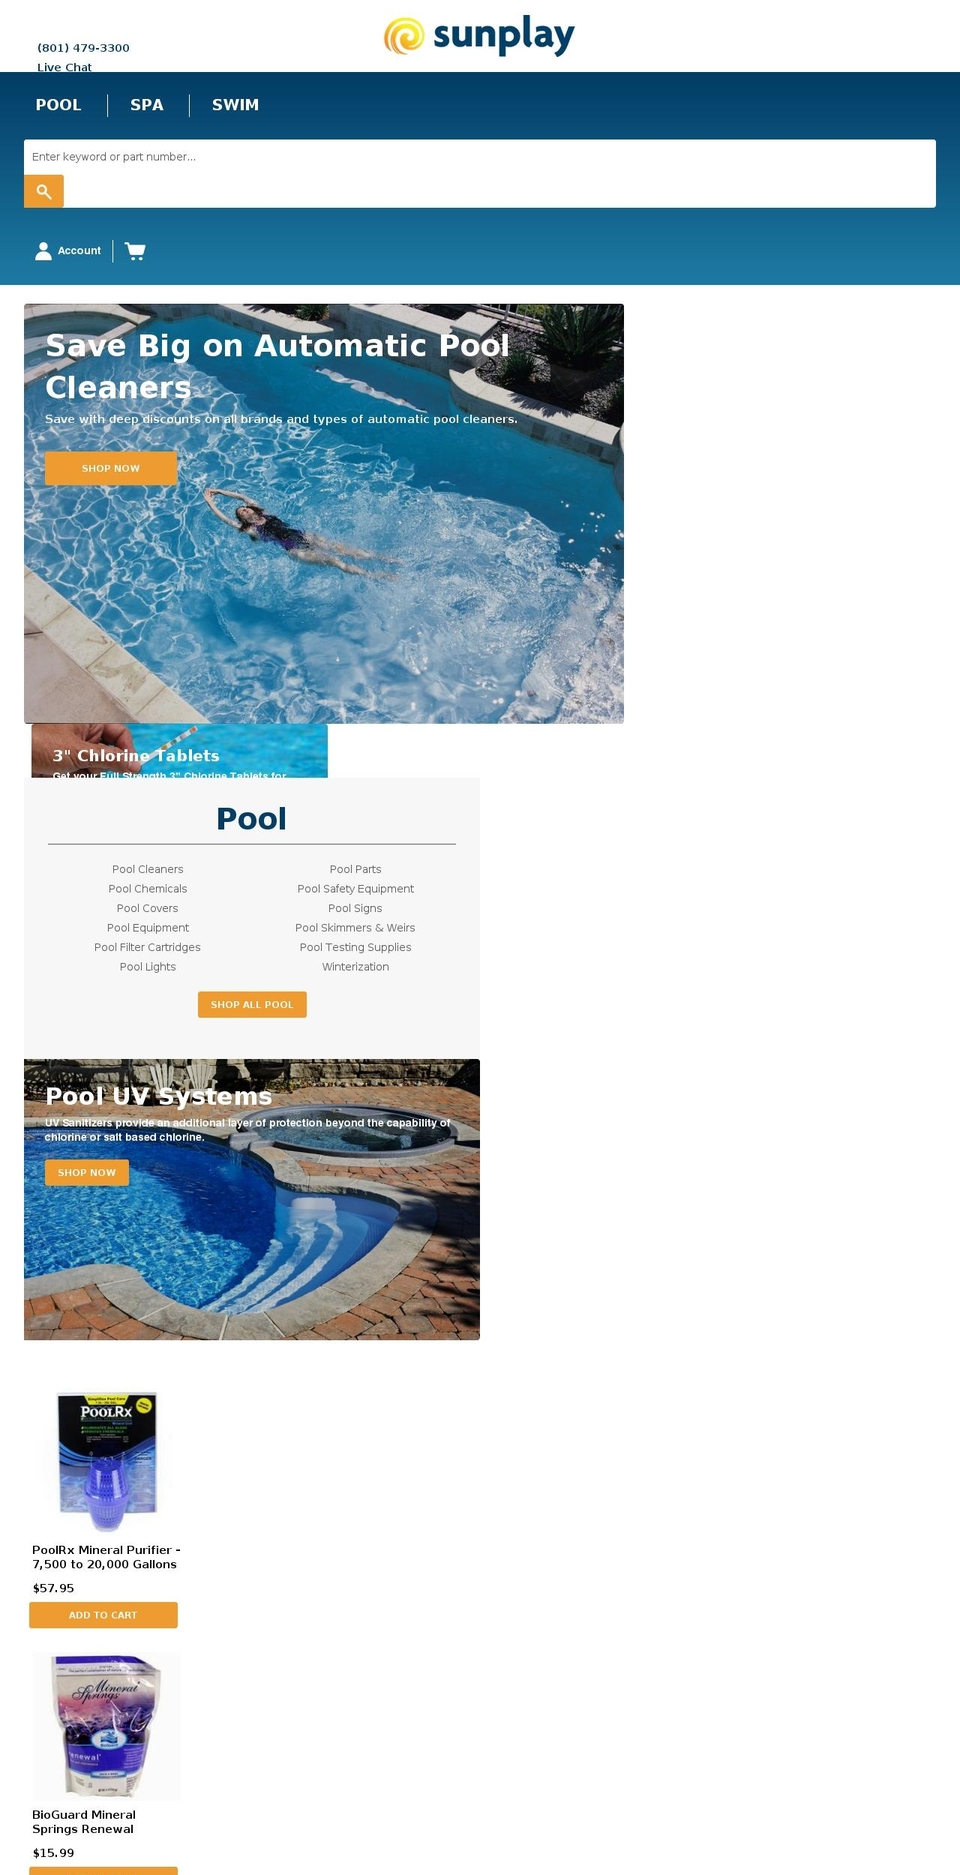 Sunplay v1.0 [Speck - Collection] Shopify theme site example sunplay.cool